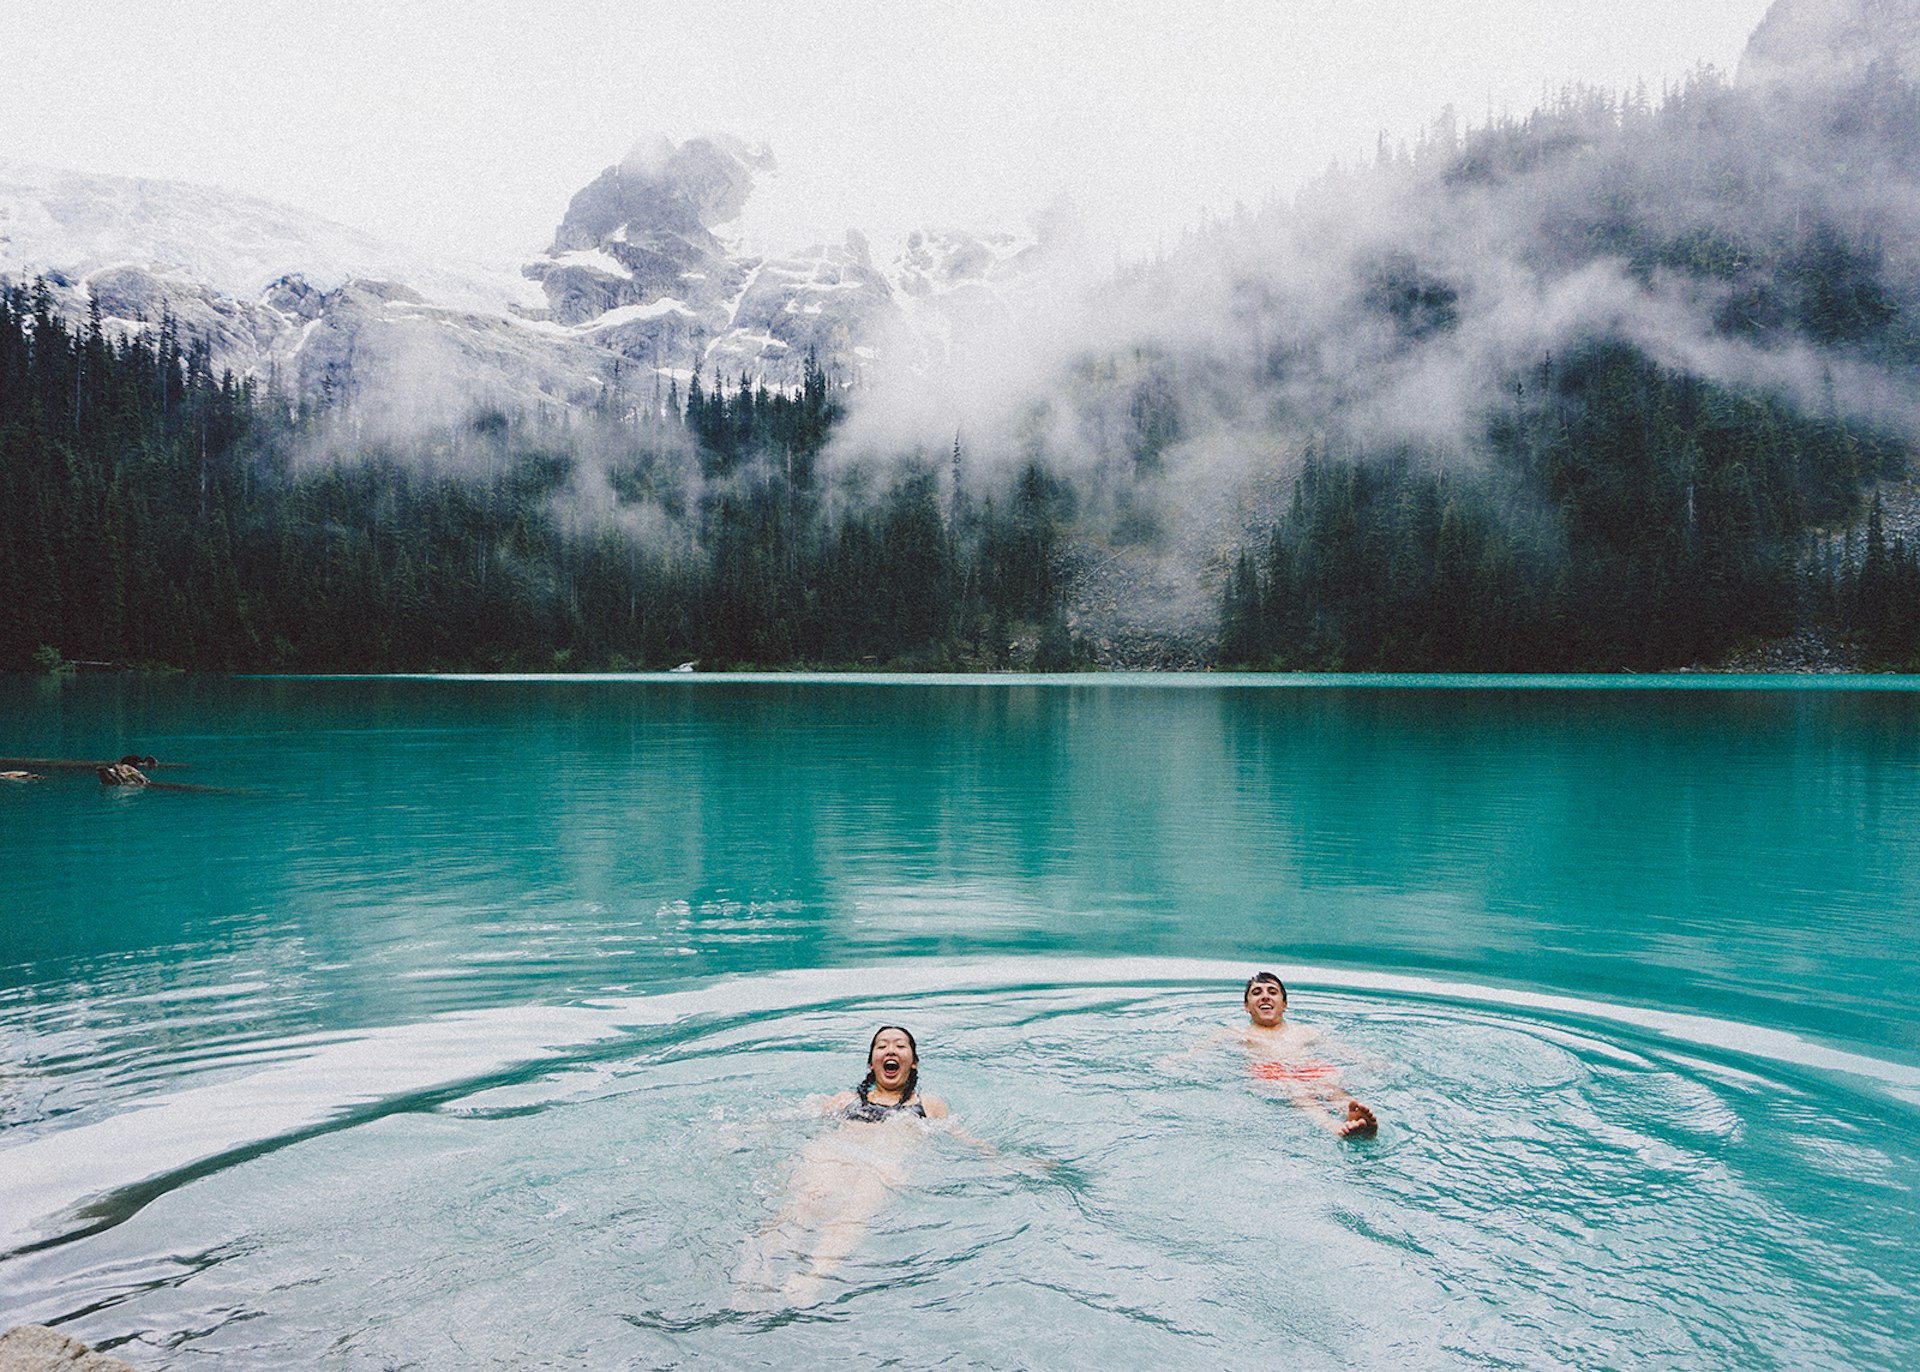 Couple swimming in a lake with mountains in the background